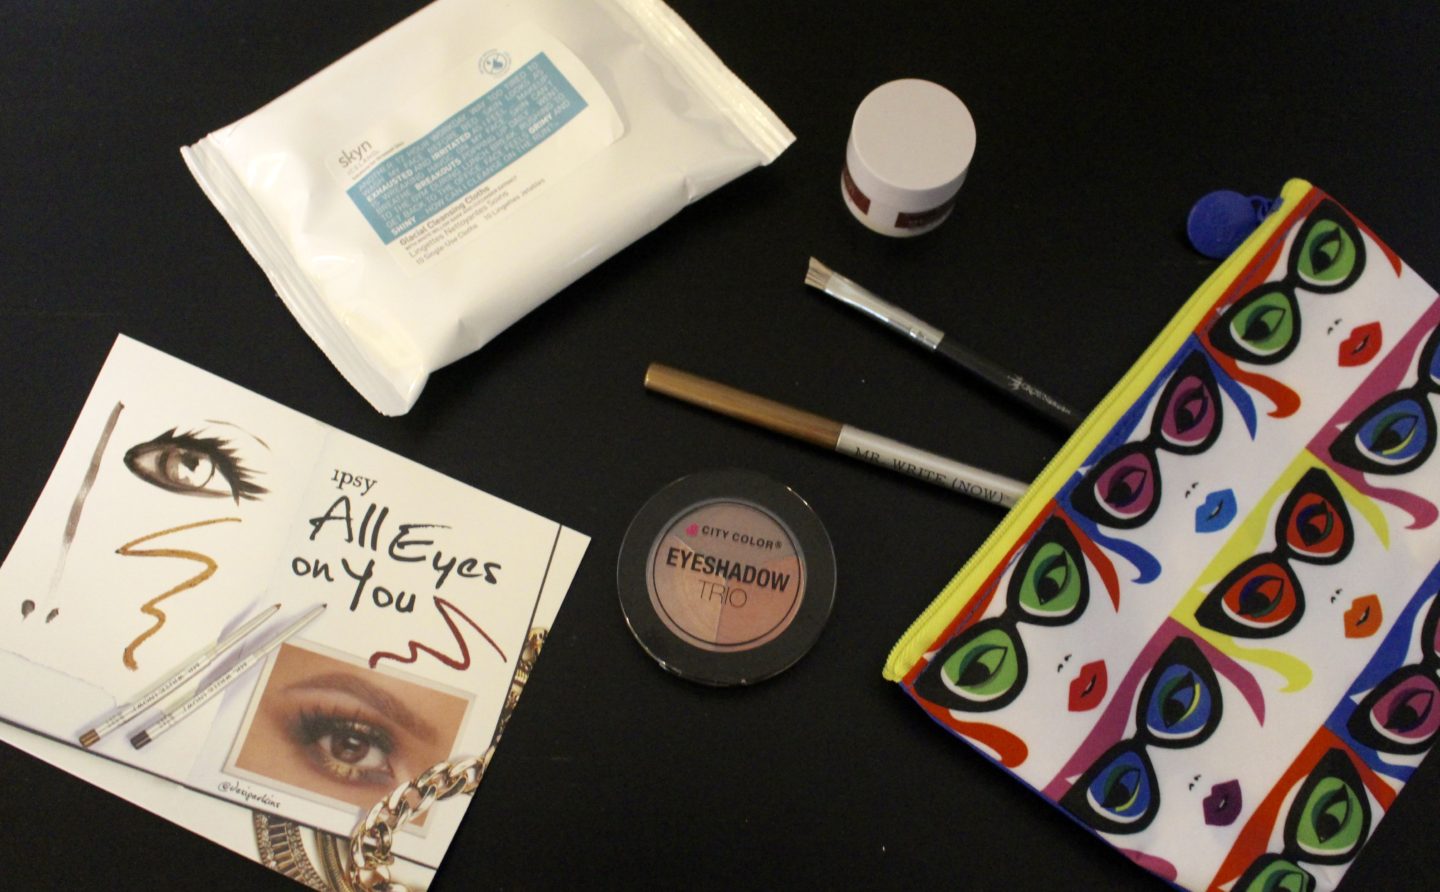 Ipsy Review #7: “All Eyes On You” January Glam Bag